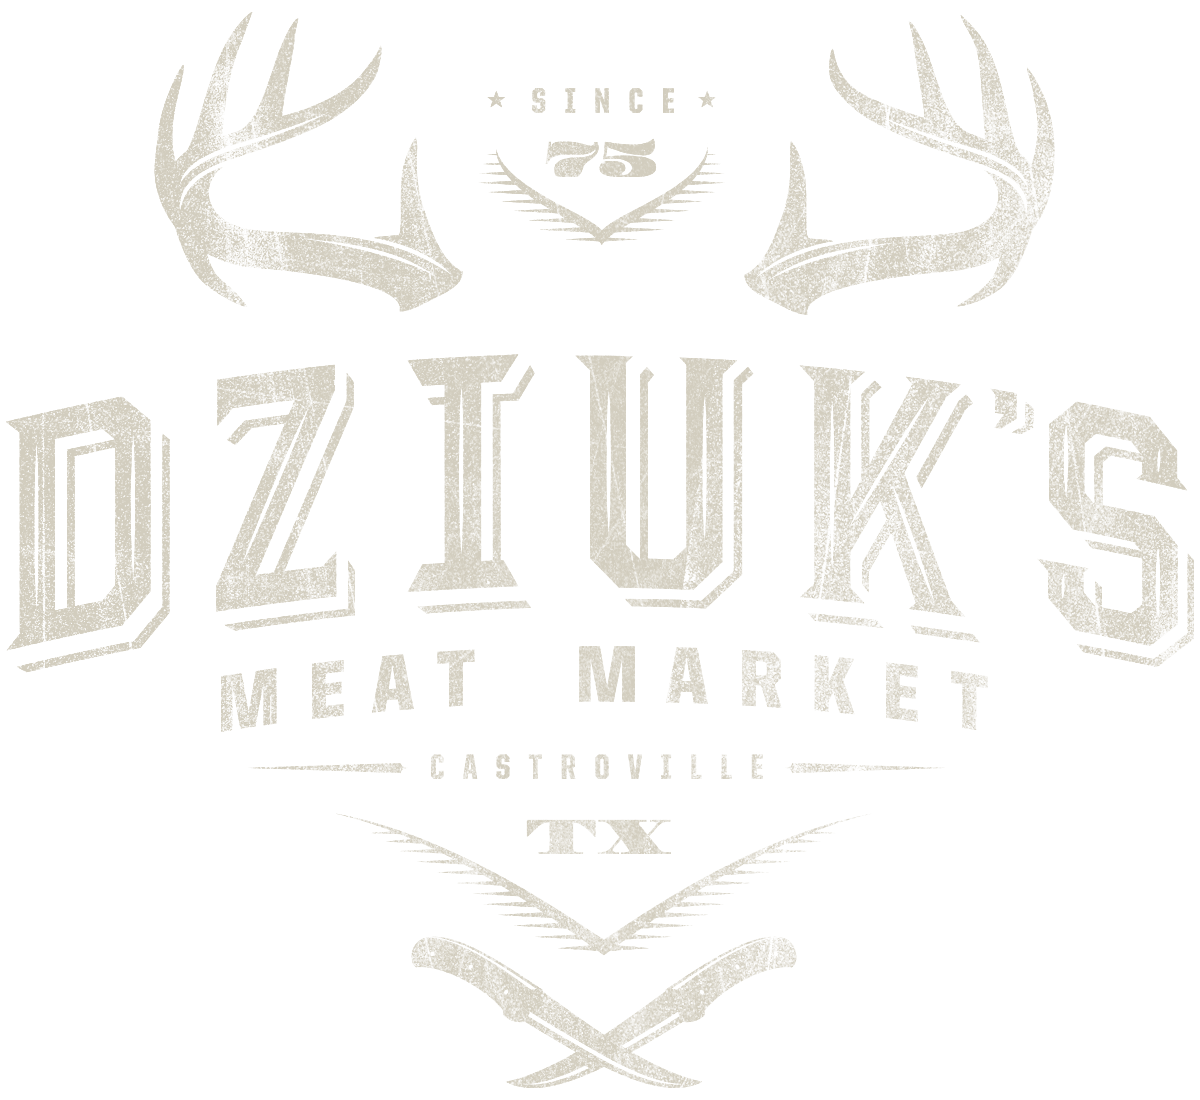 Dziuk's Meat Market : Quality Cuts : Delicious Dried Meats : Wild Game Processing : Custom Made Products